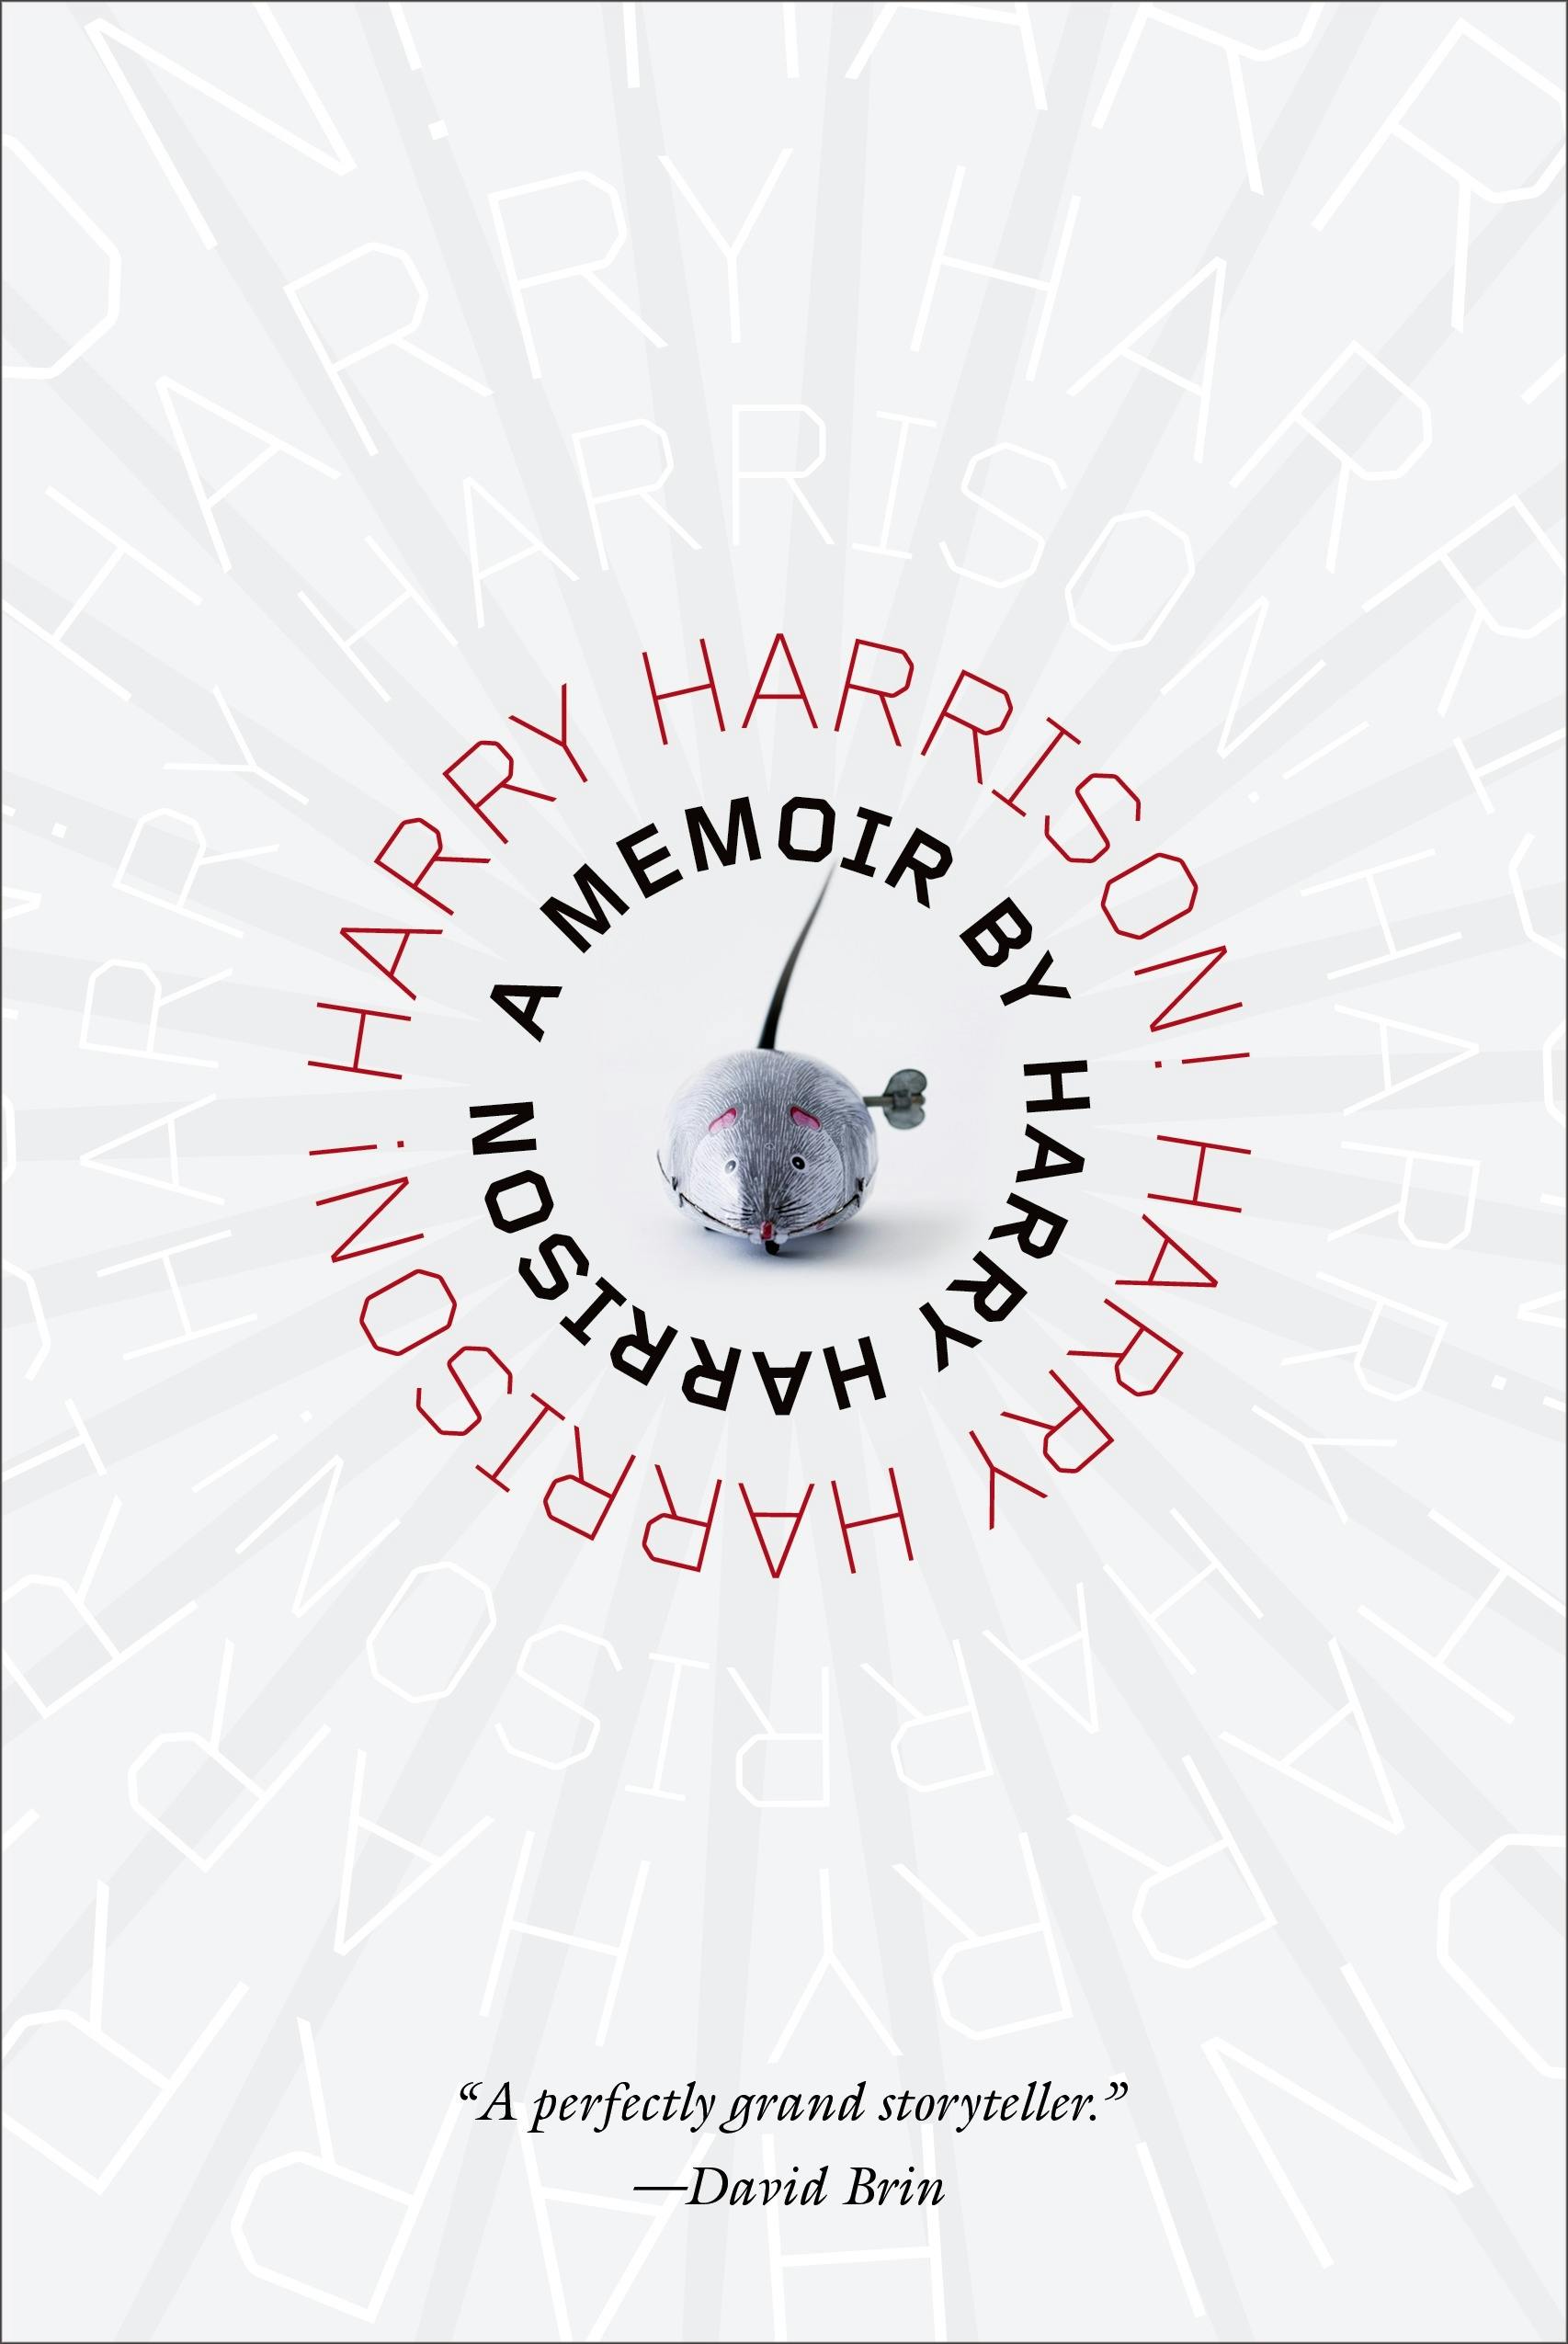 Cover for the book titled as: Harry Harrison! Harry Harrison!